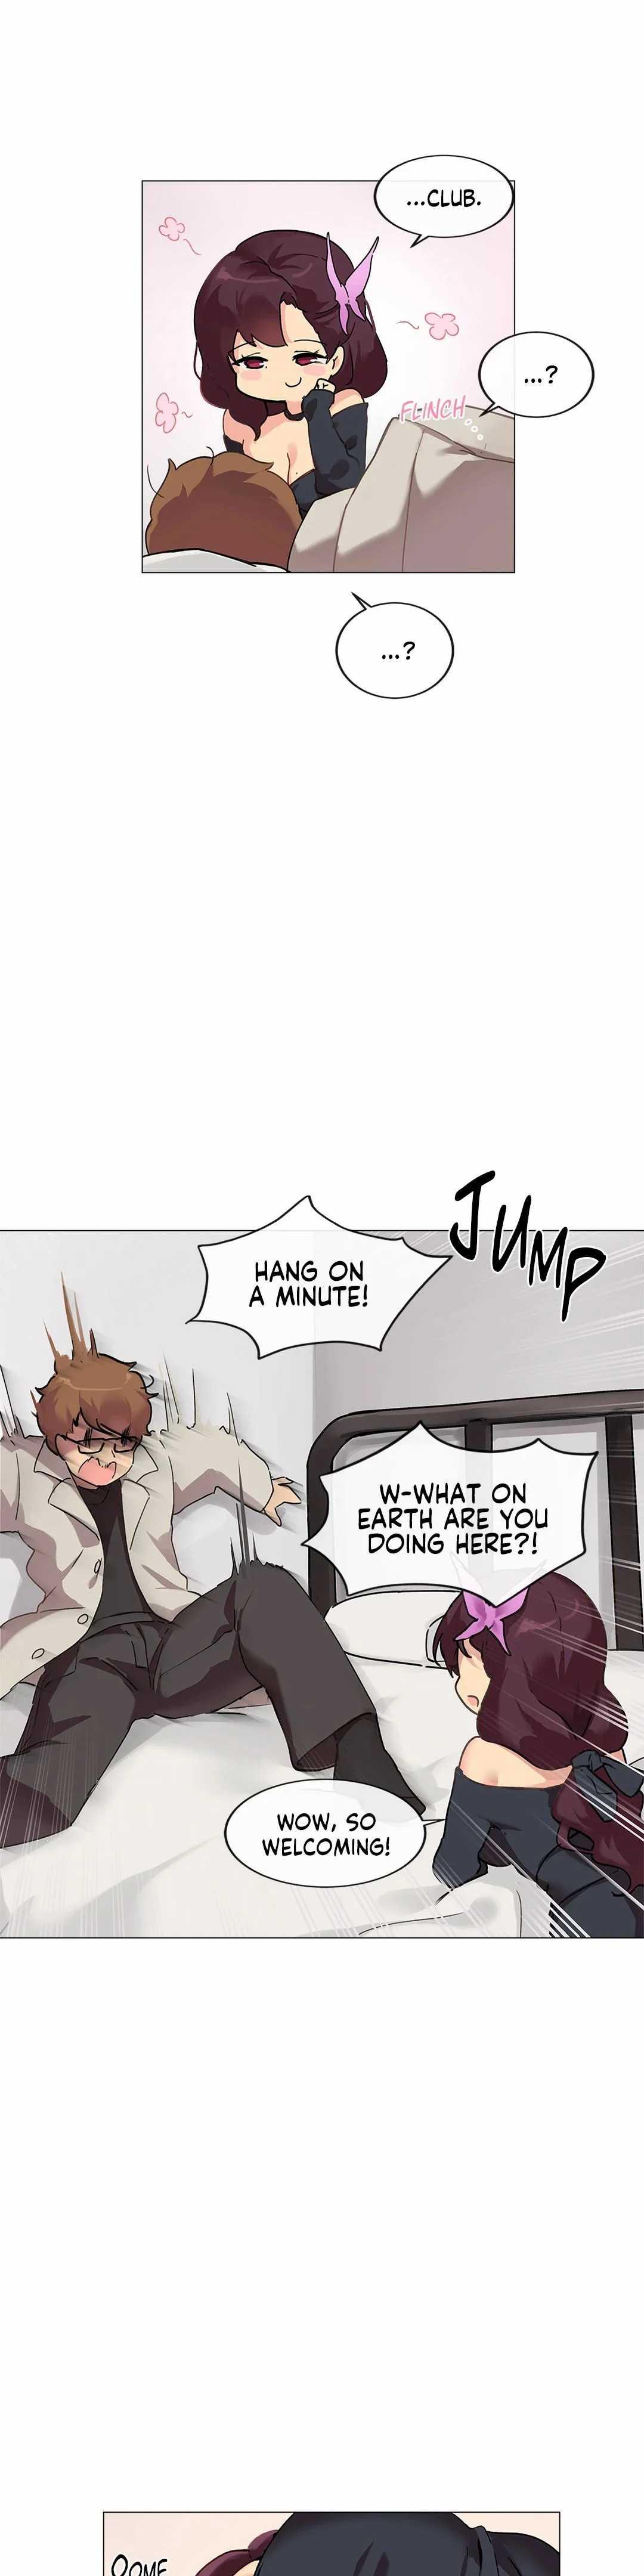 [Dumangoon, 130F] Sexcape Room: Wipe Out Ch.9/9 [English] [Manhwa PDF] Completed 6